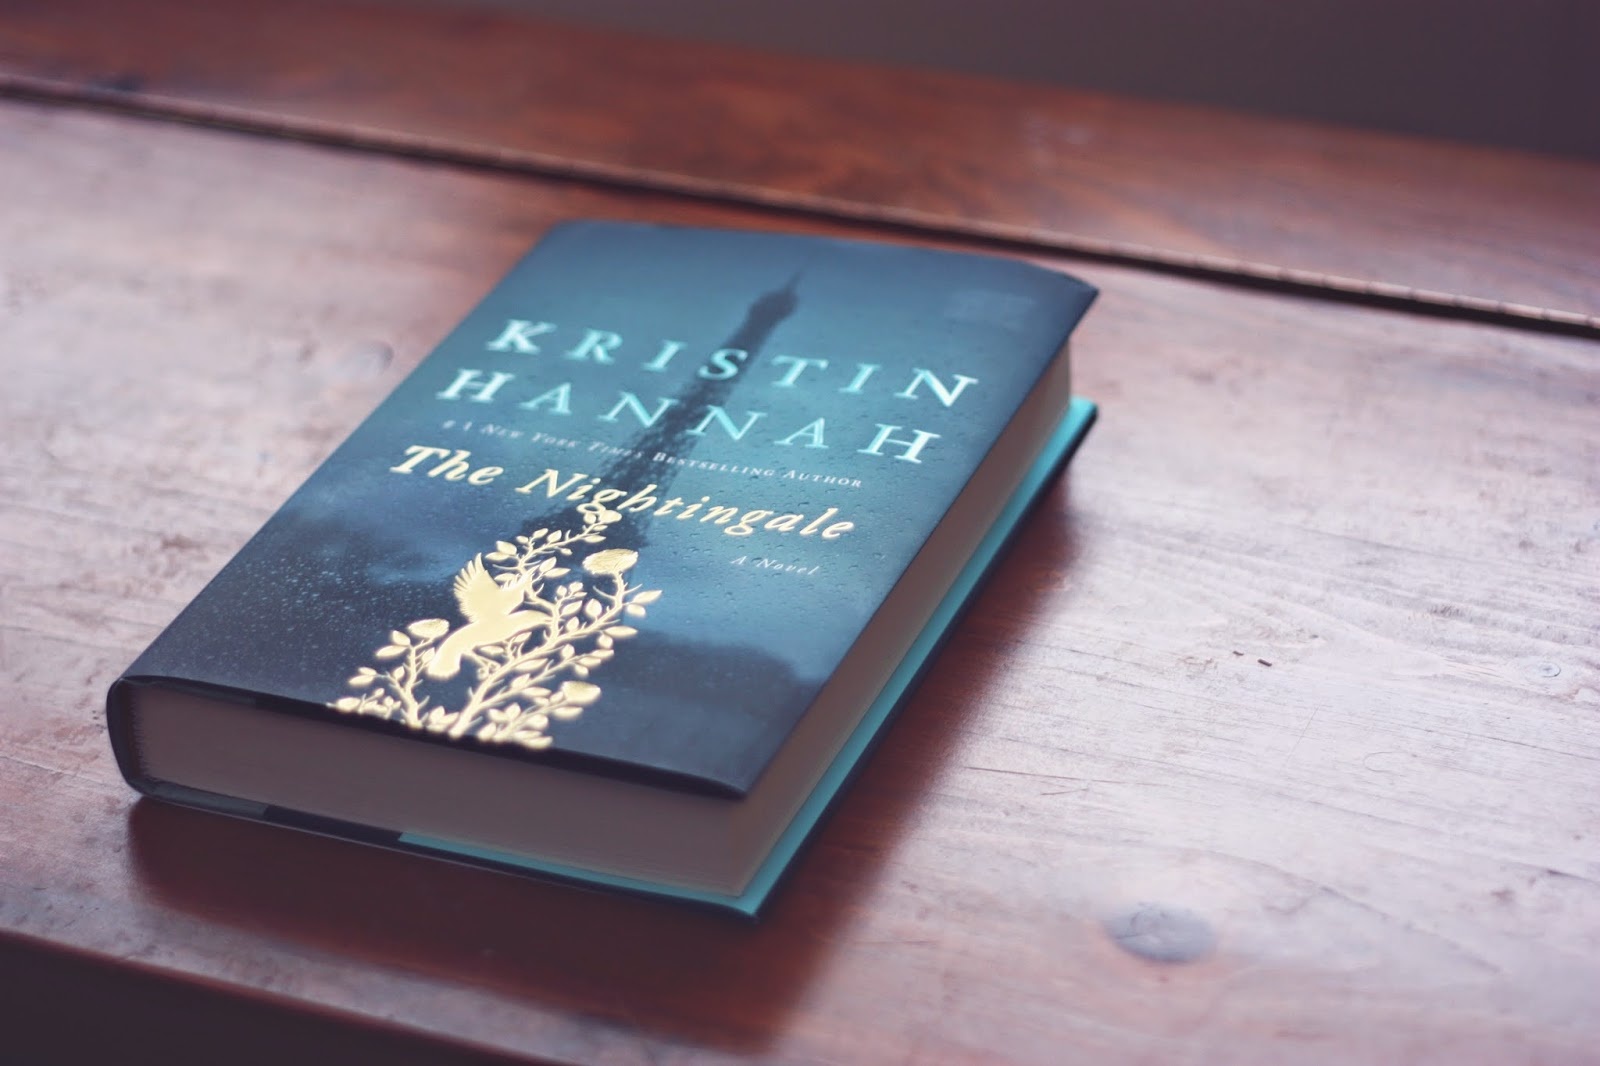 Книга those. That book. Collect that книга. The Nightingale by Kristin Hannah. Of those books is yours